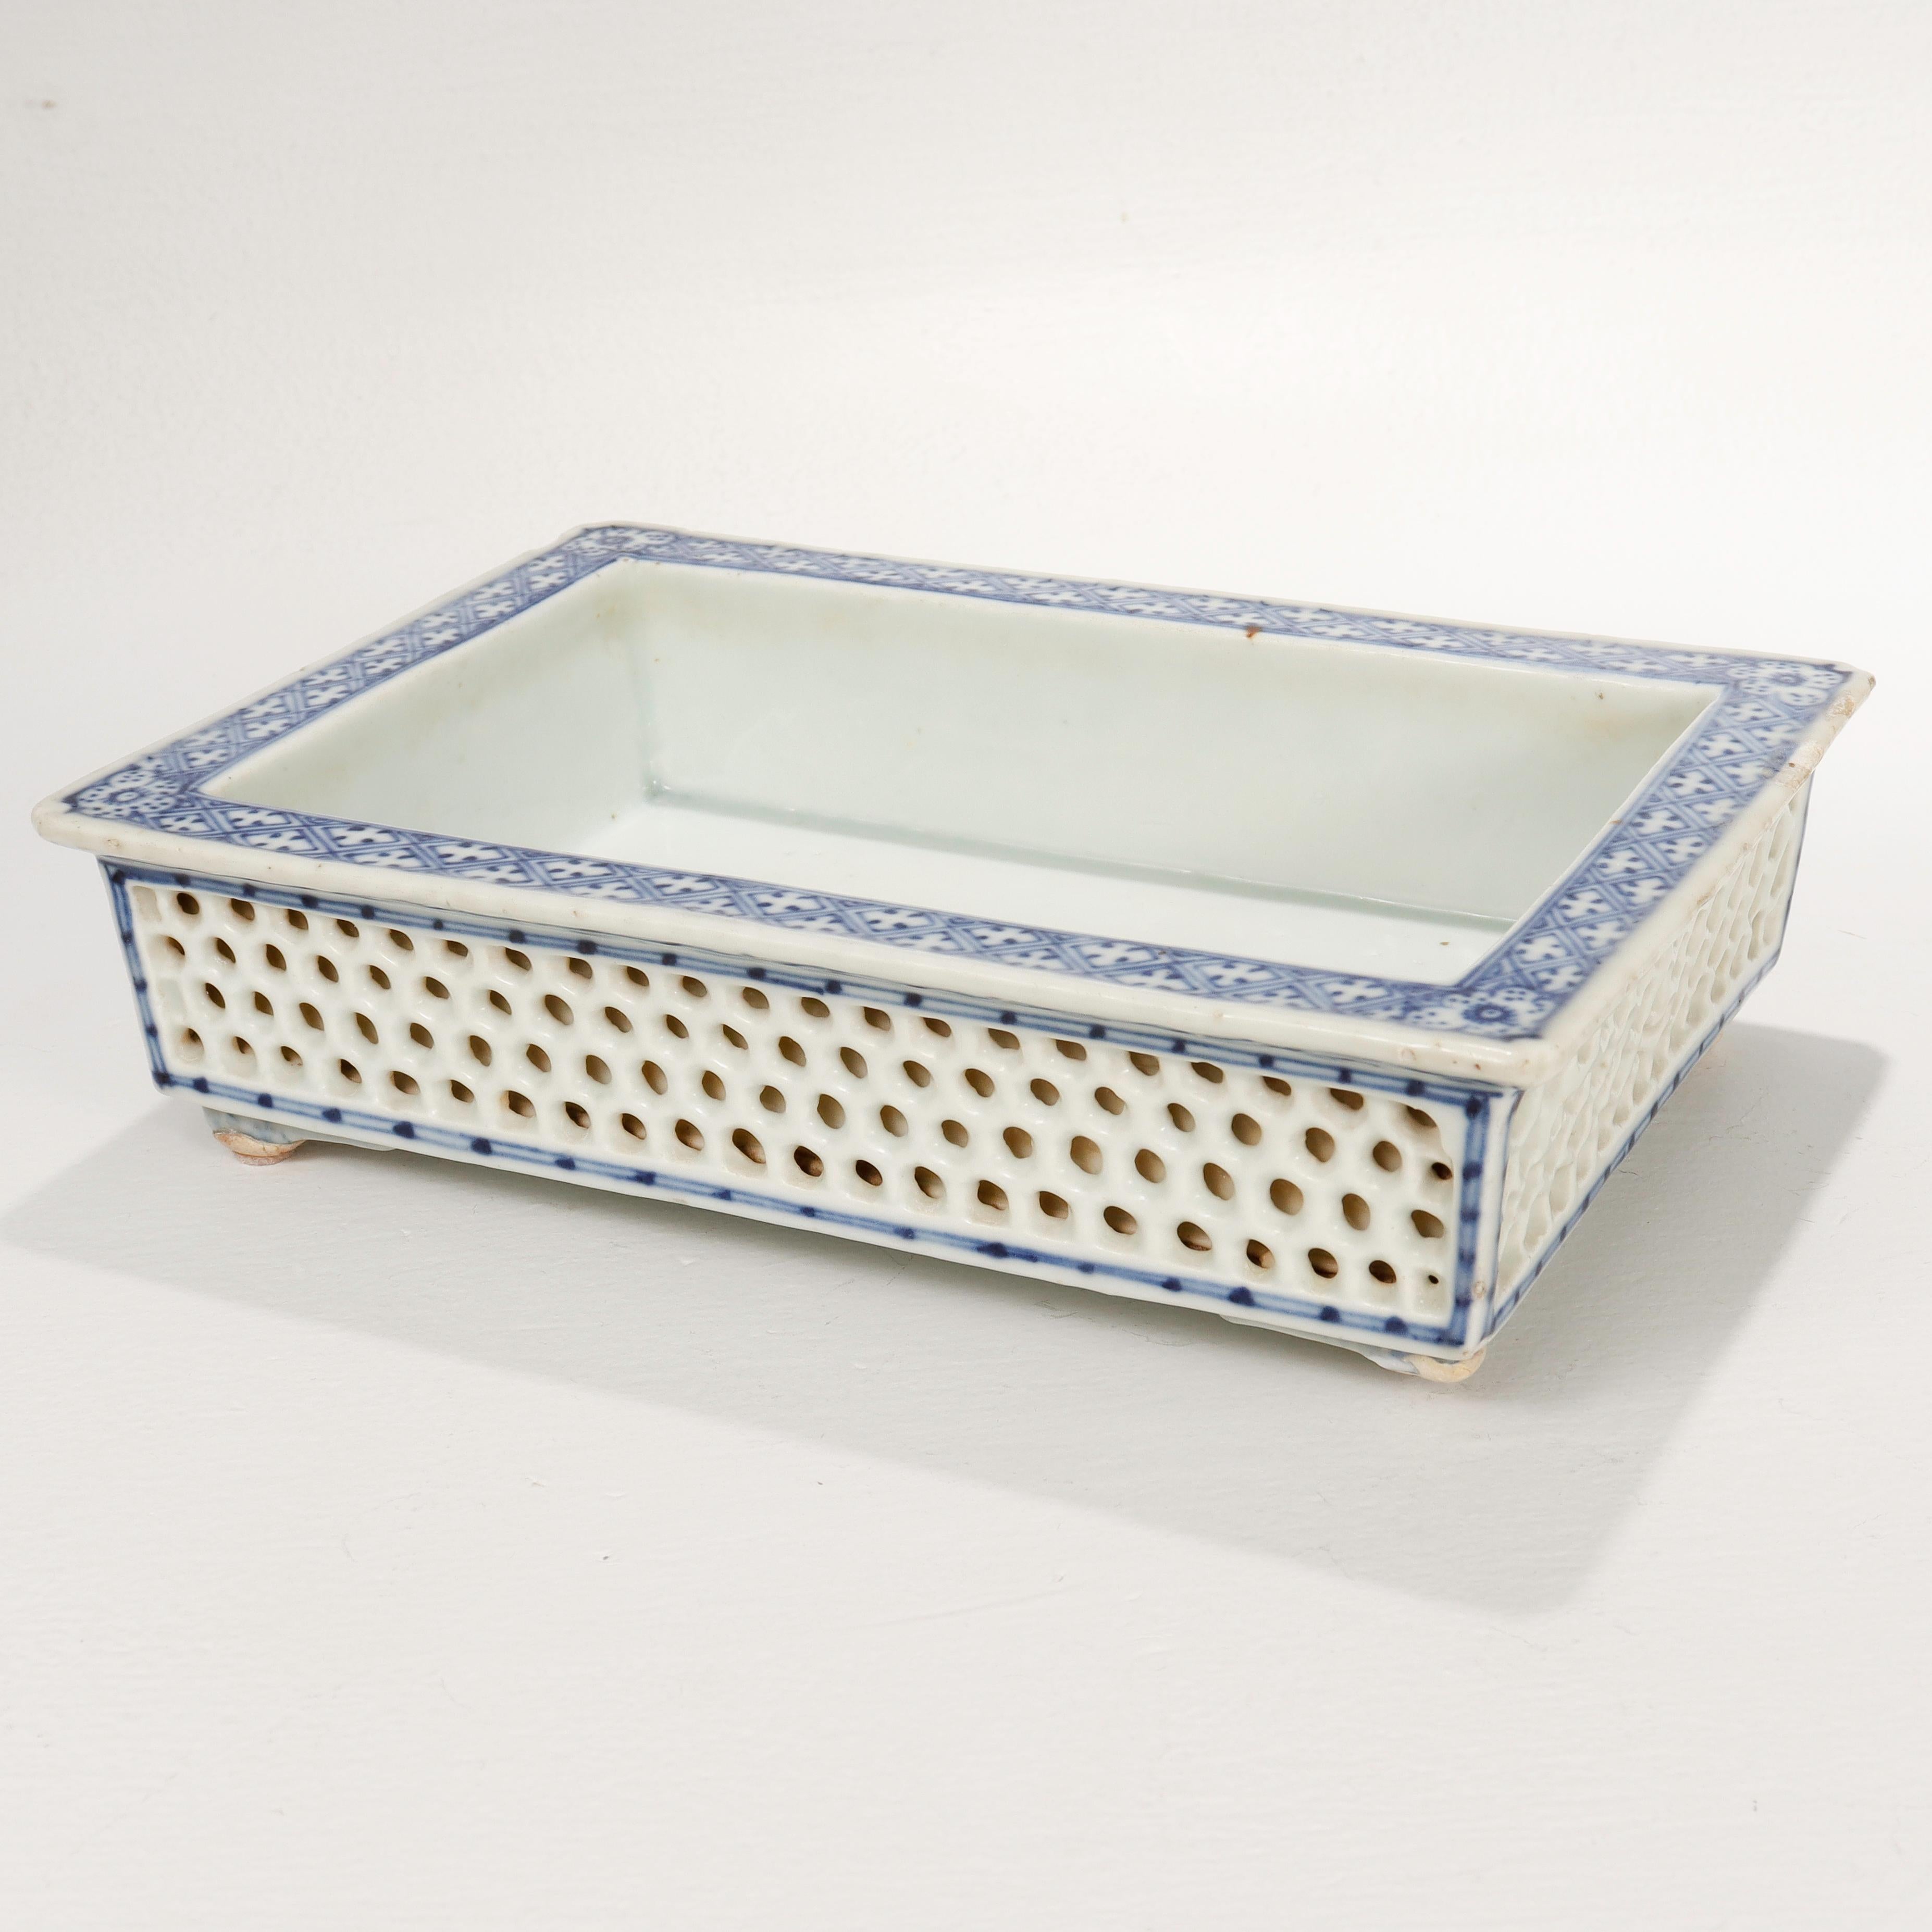 A fine old or antique double walled Chinese porcelain jardiniere.

With a wide blue & white decorated rim above honey comb lattice work double walled sides.

Supported by bracket feet.

Simply a wonderful Chinese porcelain planter or